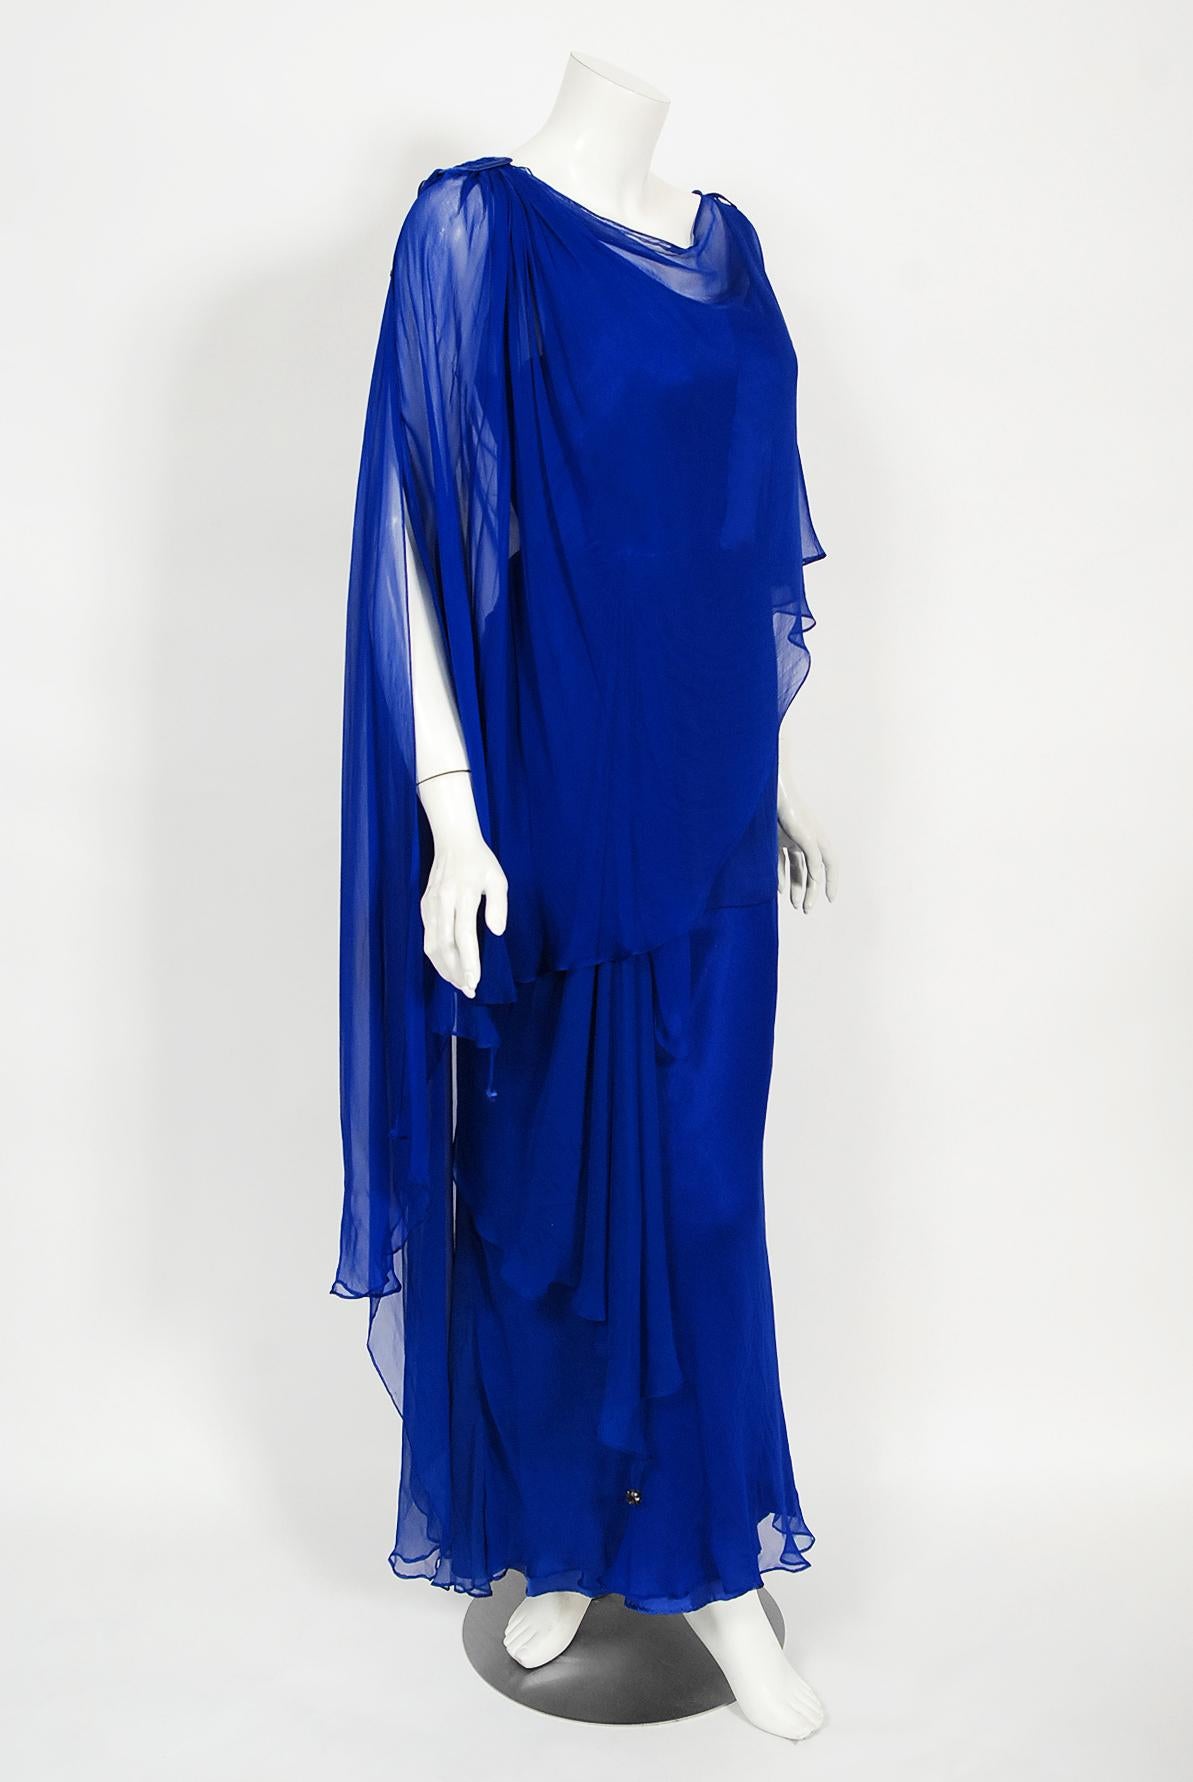 Vintage 1967 Givenchy Haute Couture Cobalt Blue Draped Silk Chiffon Caftan Gown In Good Condition For Sale In Beverly Hills, CA